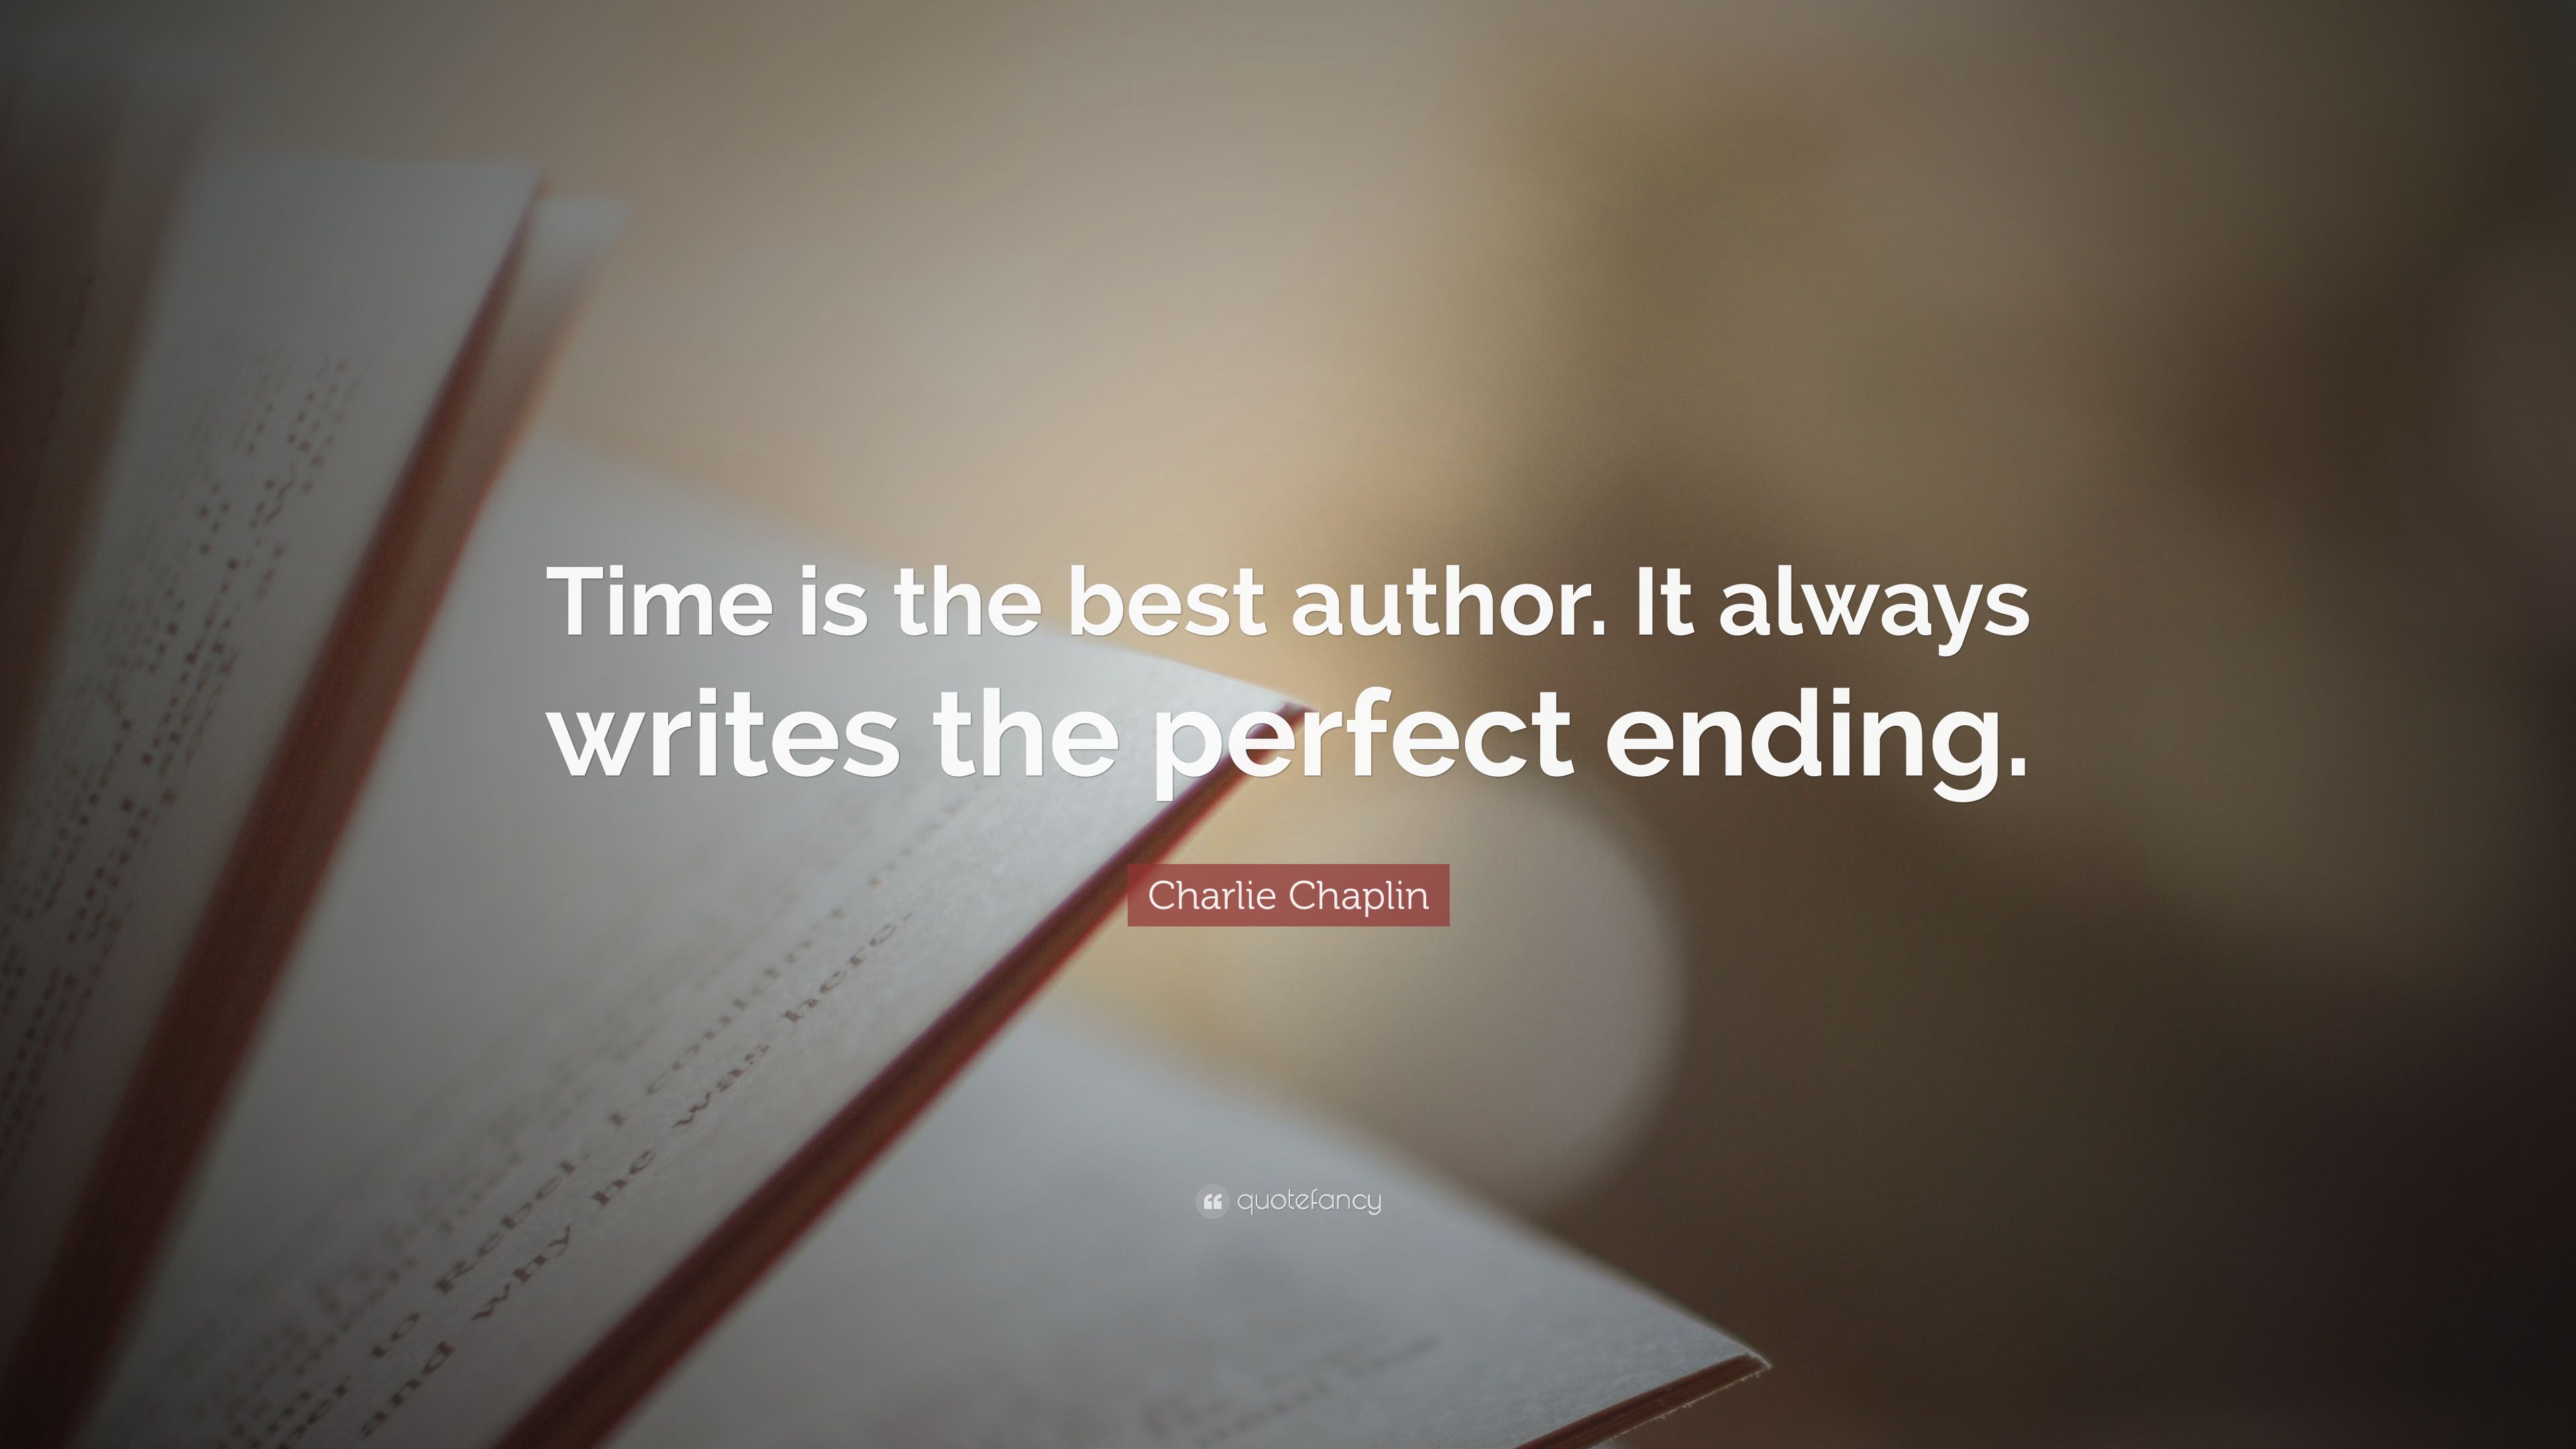 Charlie Chaplin Quote: “Time is the best author. It always writes the perfect ending.” (12 wallpaper)